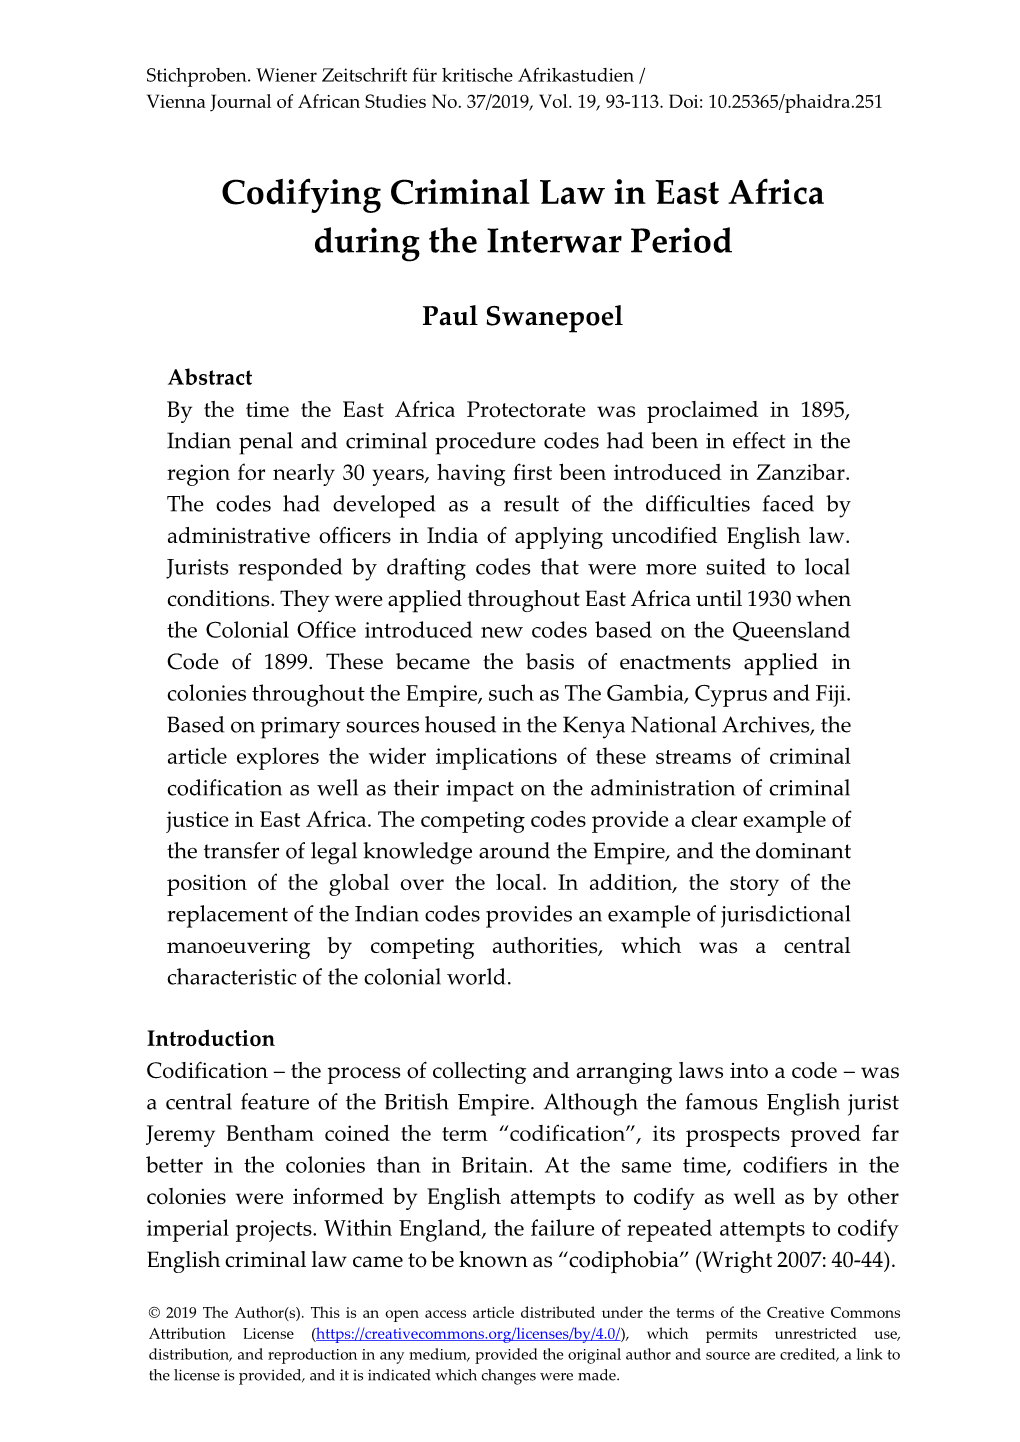 Codifying Criminal Law in East Africa During the Interwar Period